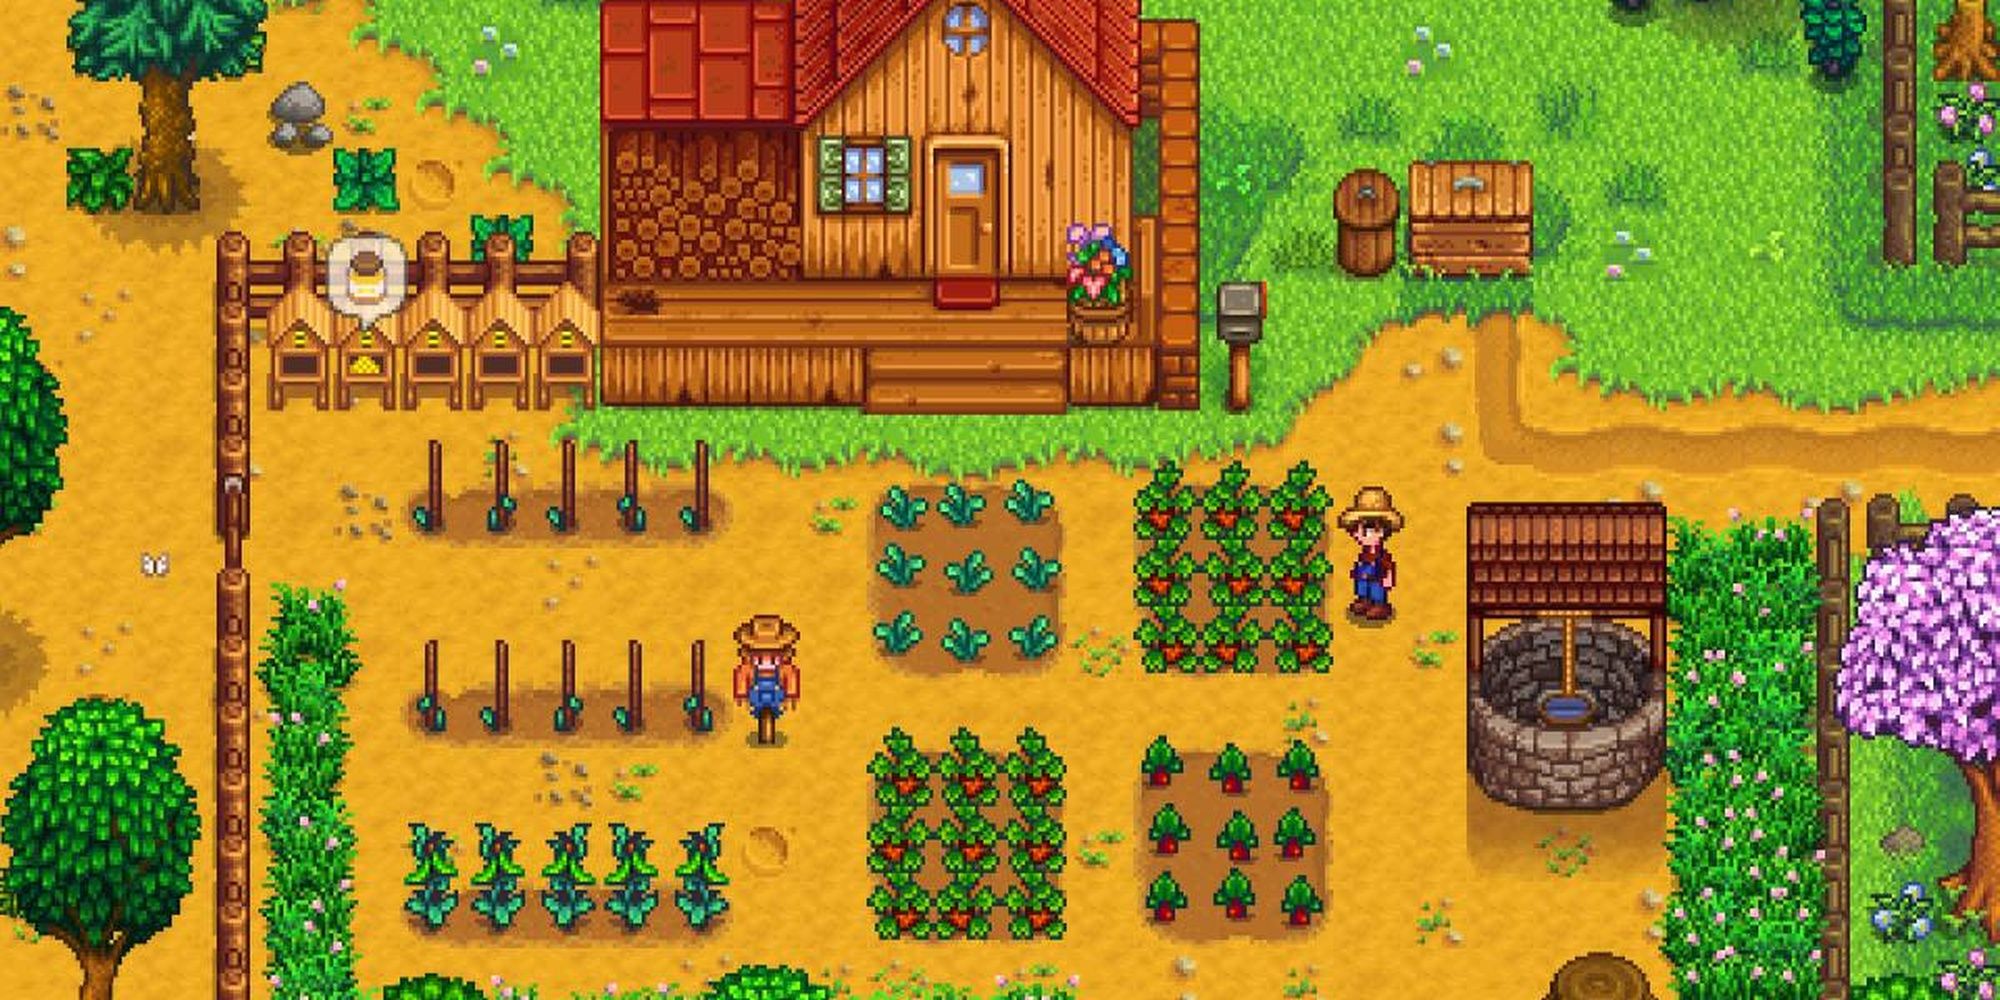 A player's farm in Stardew Valley